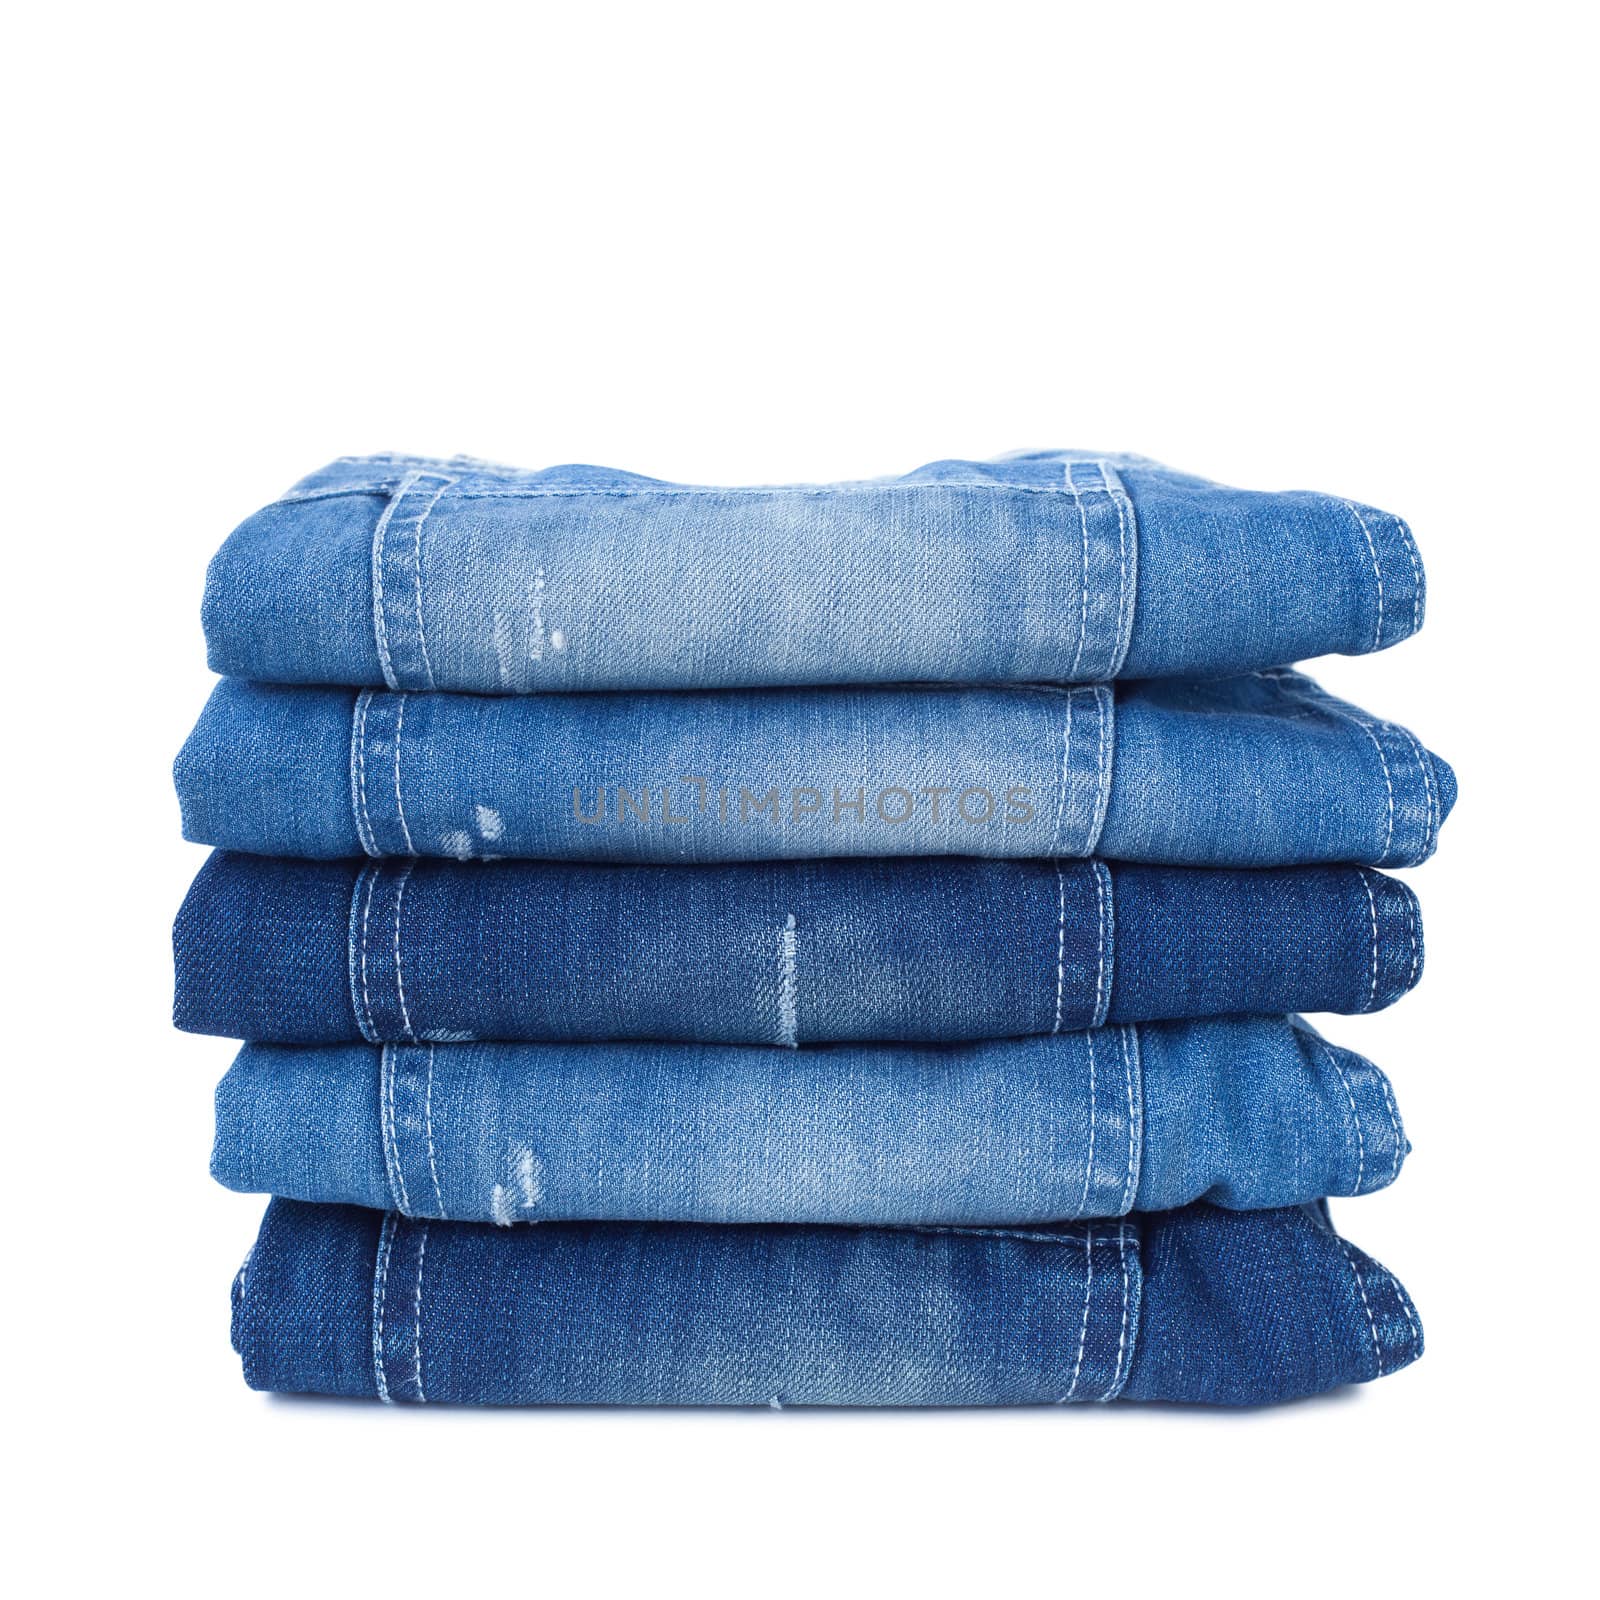 Stack of blue jeans isolated on white background